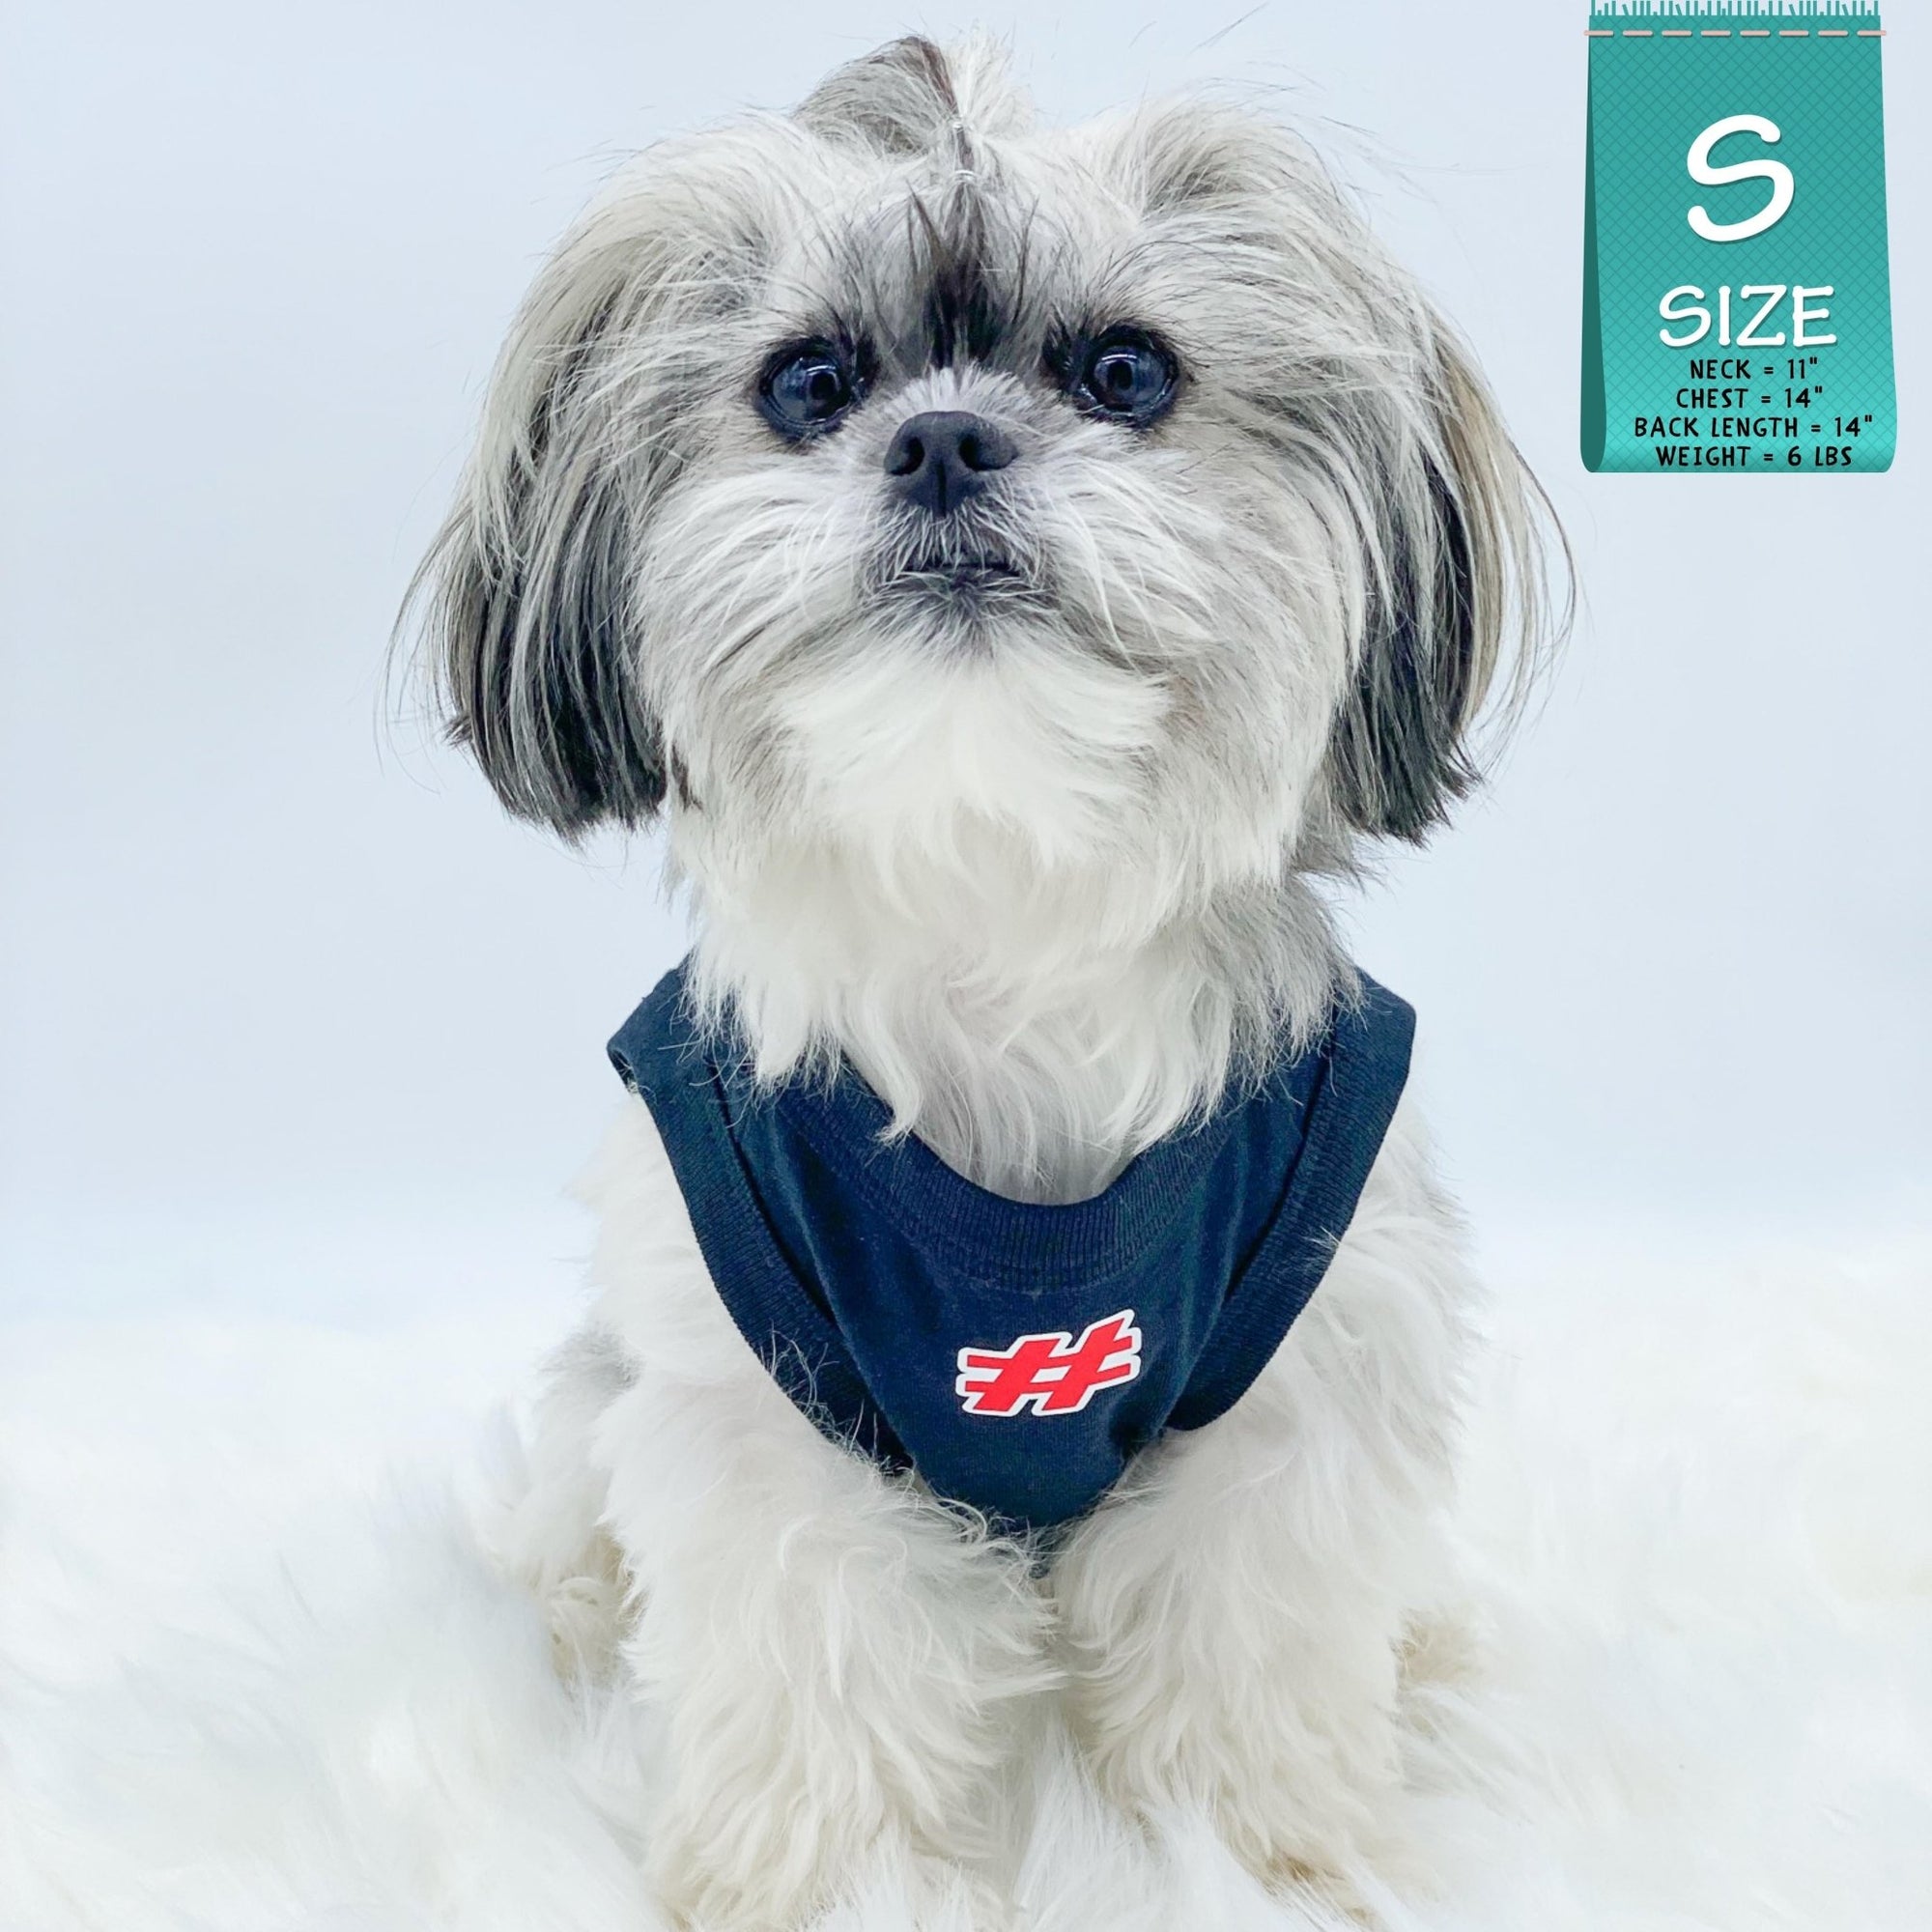 Dog T-Shirt - Shih Tzu mix wearing &quot;Sorry Not Sorry&quot; black dog t-shirt with red and white hashtag emoji on chest - against solid white background - Wag Trendz